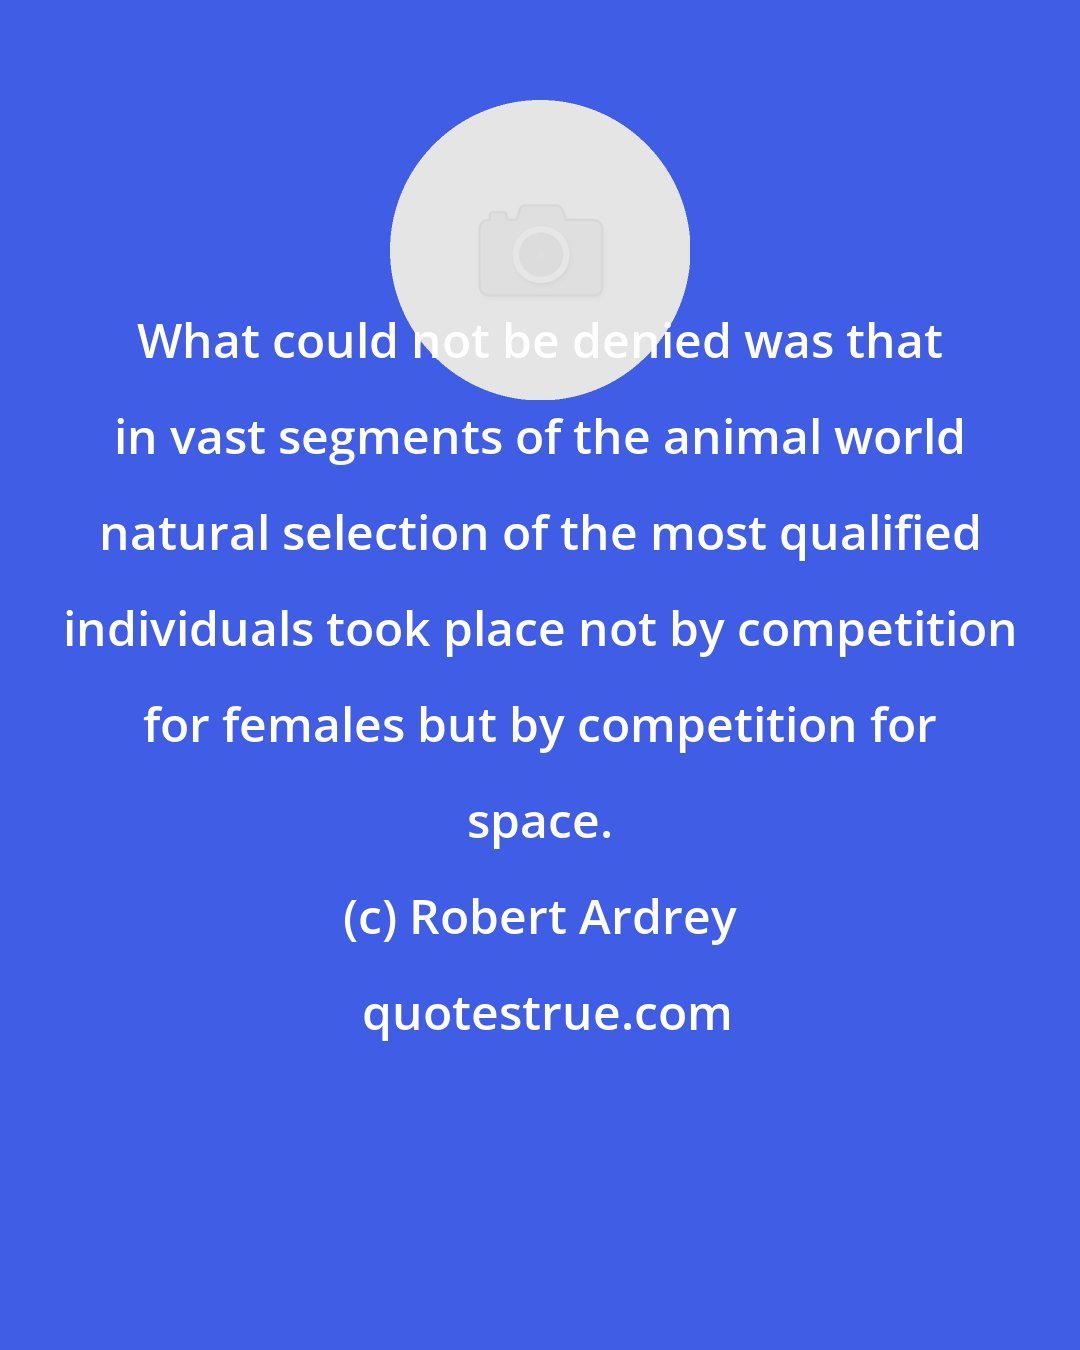 Robert Ardrey: What could not be denied was that in vast segments of the animal world natural selection of the most qualified individuals took place not by competition for females but by competition for space.